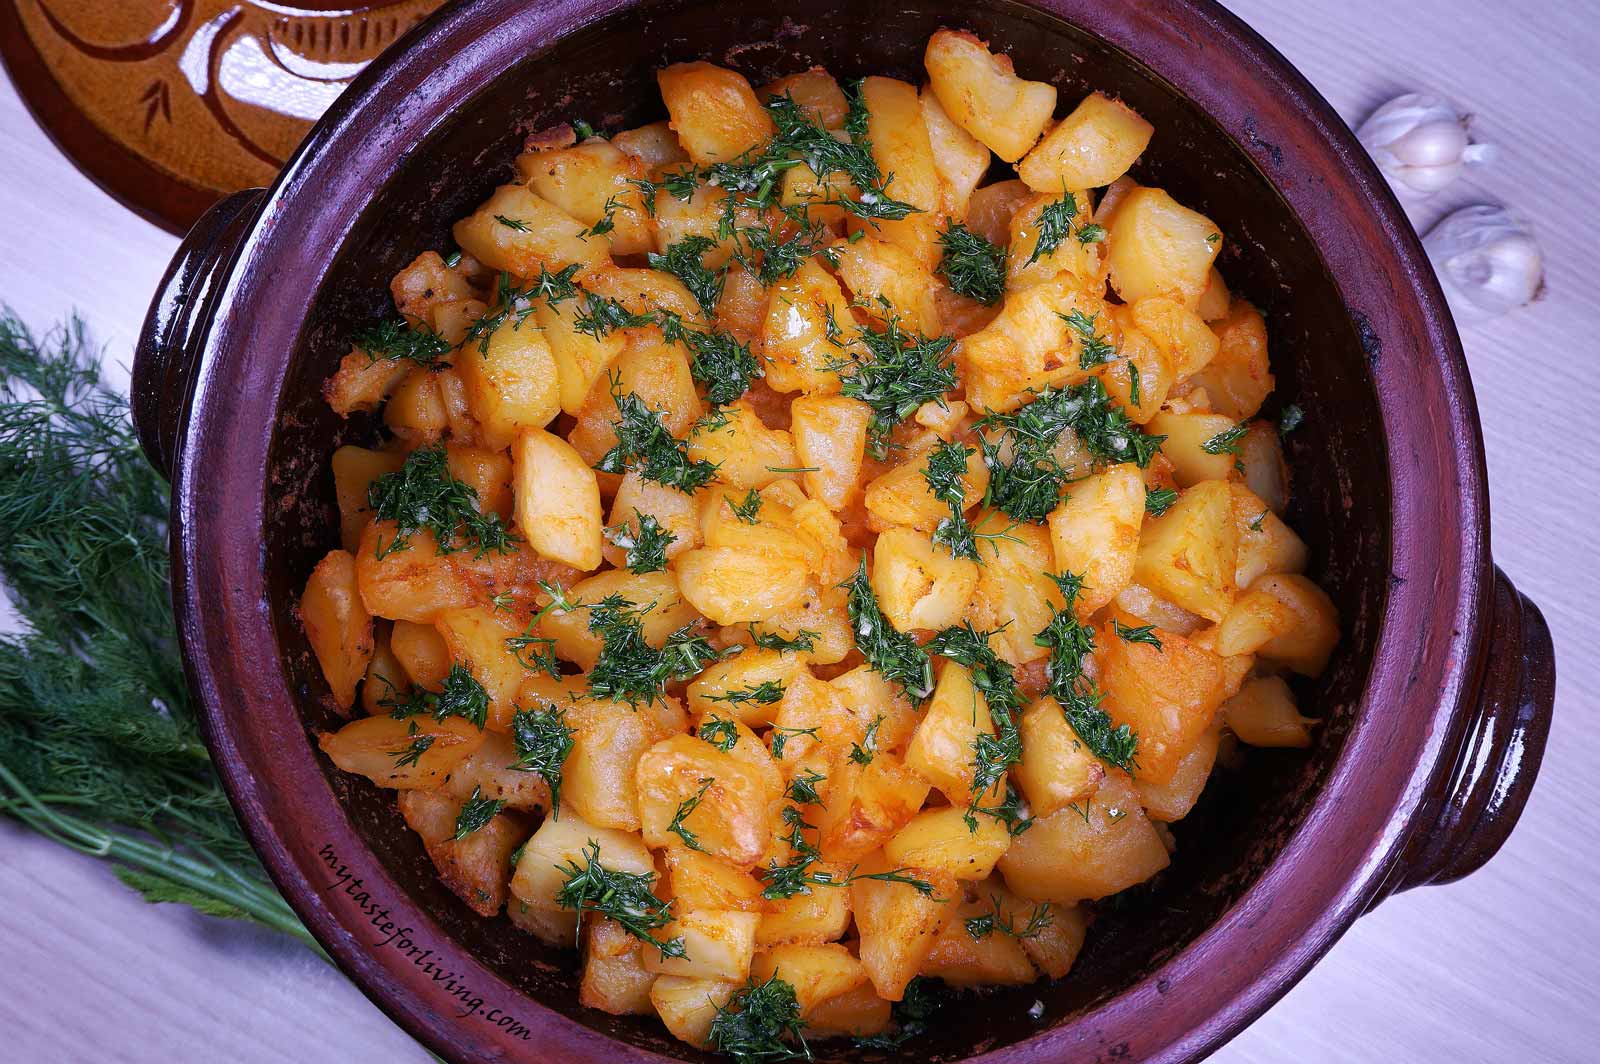 At home, we love everything made with potatoes. I am happy to share my way of making sauteed potatoes. According to the original recipe, the potatoes are fried, but since I avoid frying, I prefer the healthy option, so I bake them. They are great, and in combination with a glass of kefir (ayran) or beer, they are irresistible.